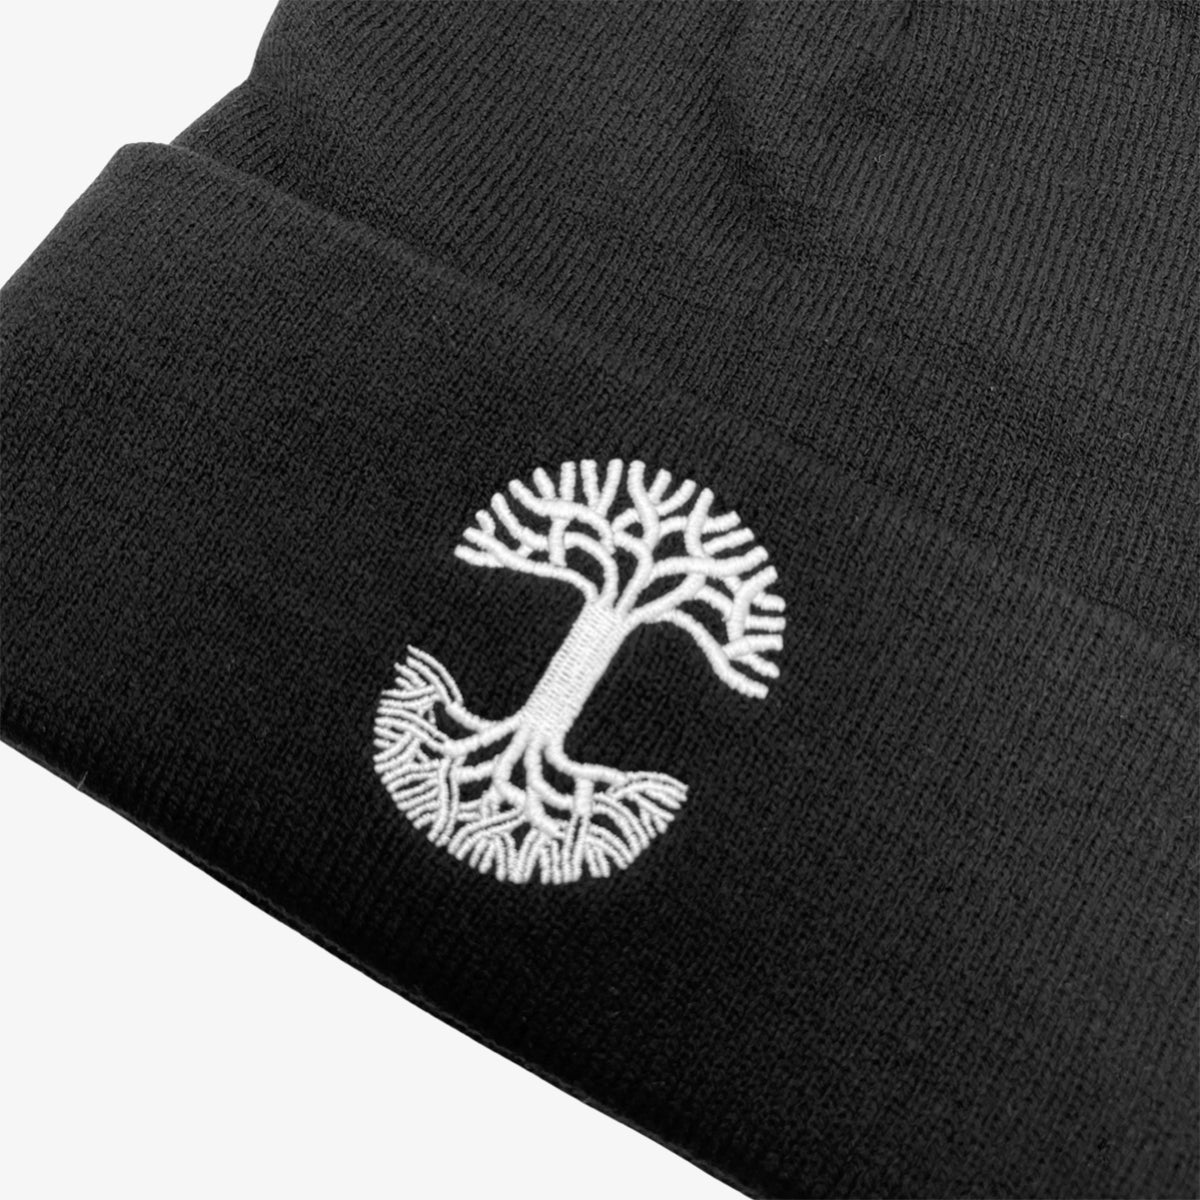 Close-up of white embroidered Oaklandish tree logo on the cuff of a black beanie.